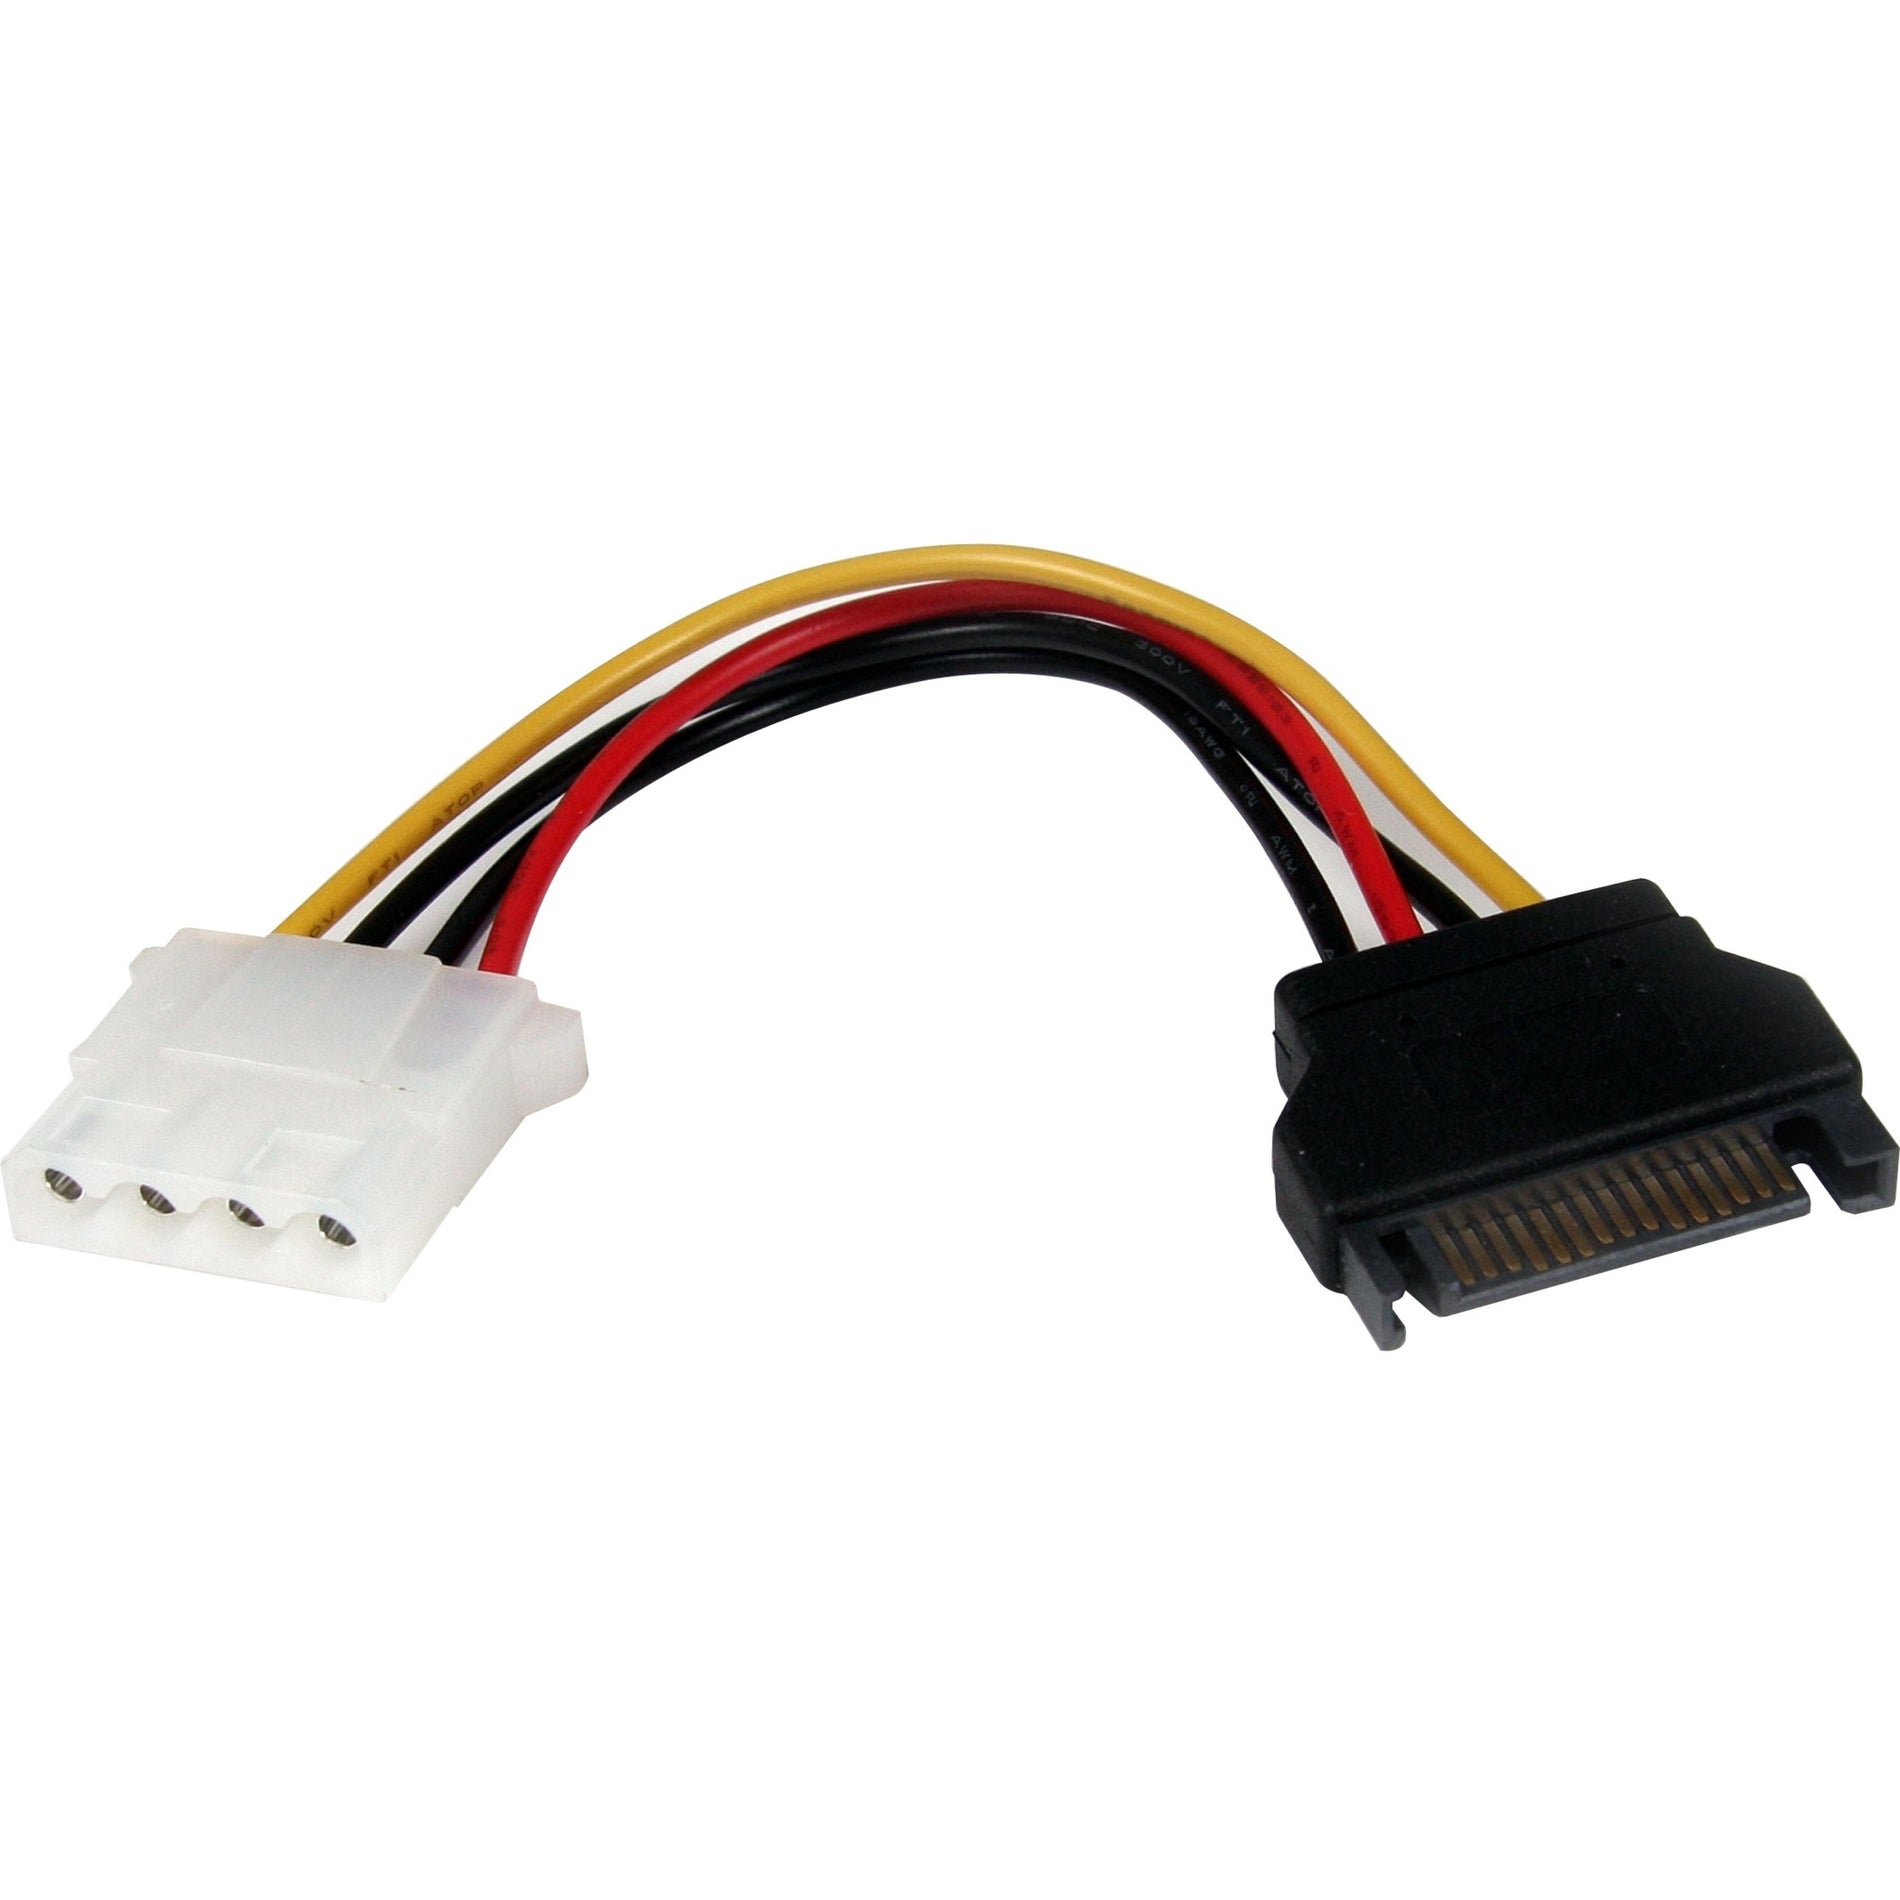 StarTech.com LP4SATAFM6IN 6in SATA to LP4 Power Cable Adapter Easy Hard Drive Power Connection.